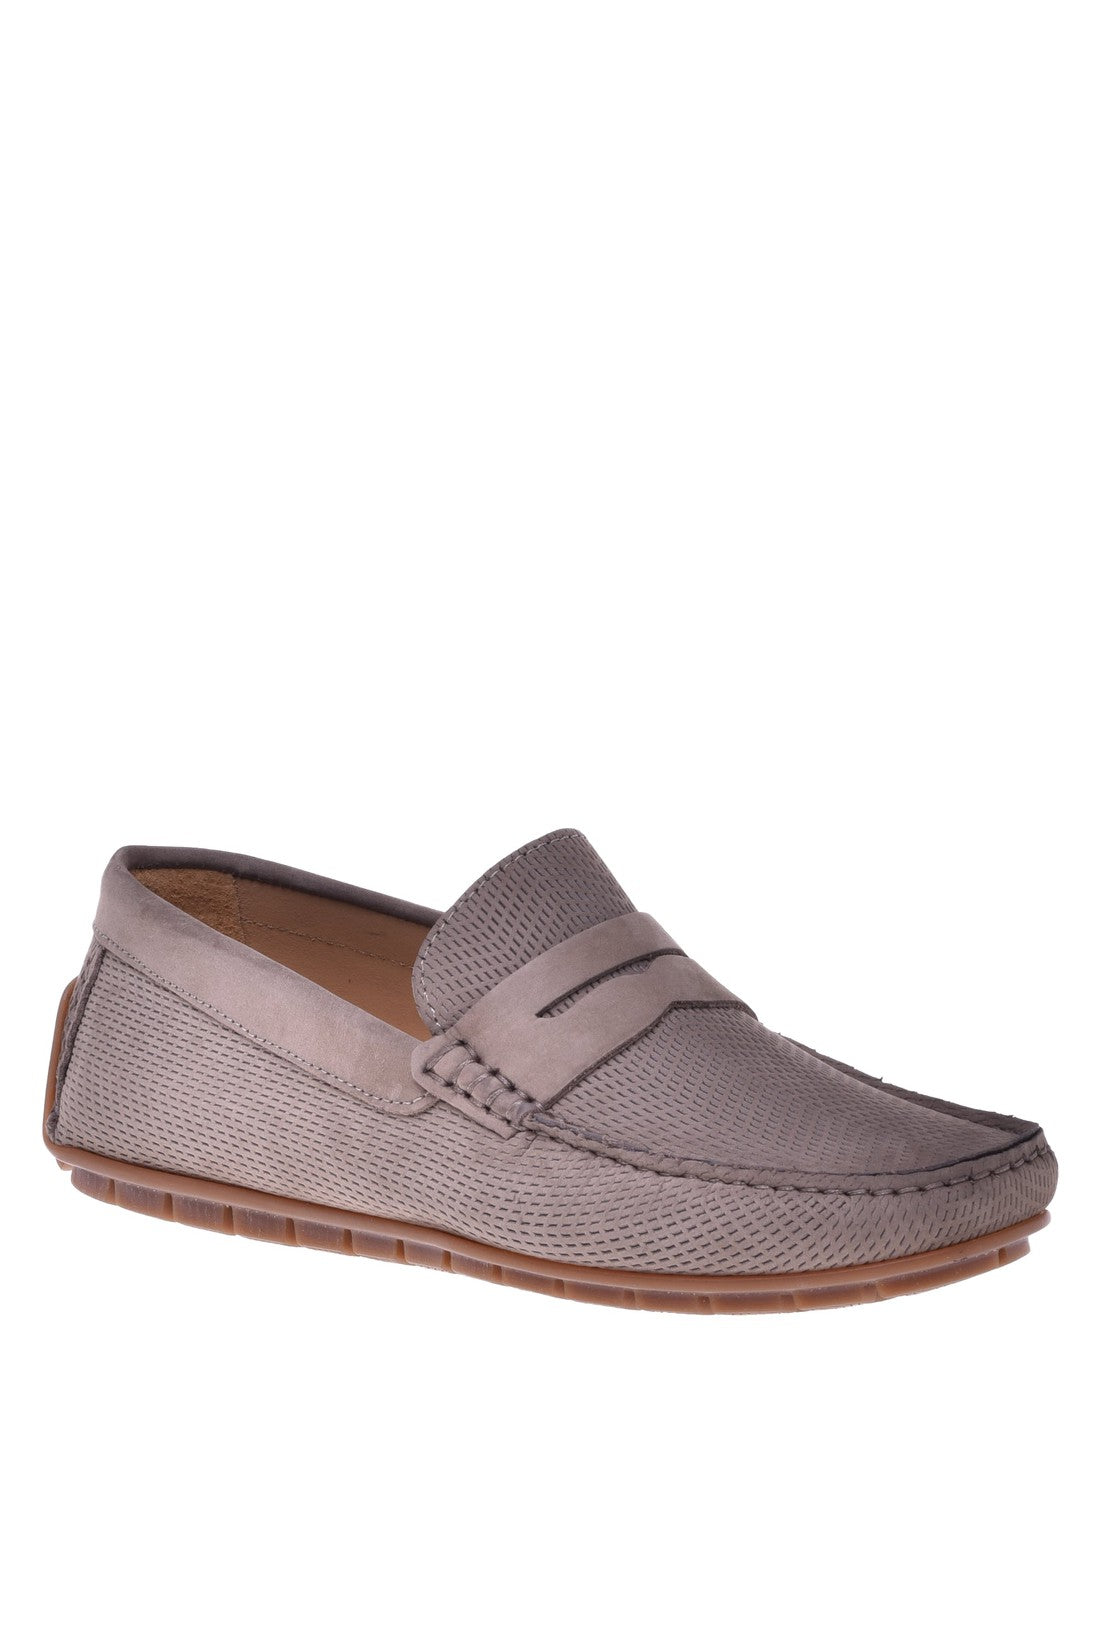 Loafer in taupe nubuck